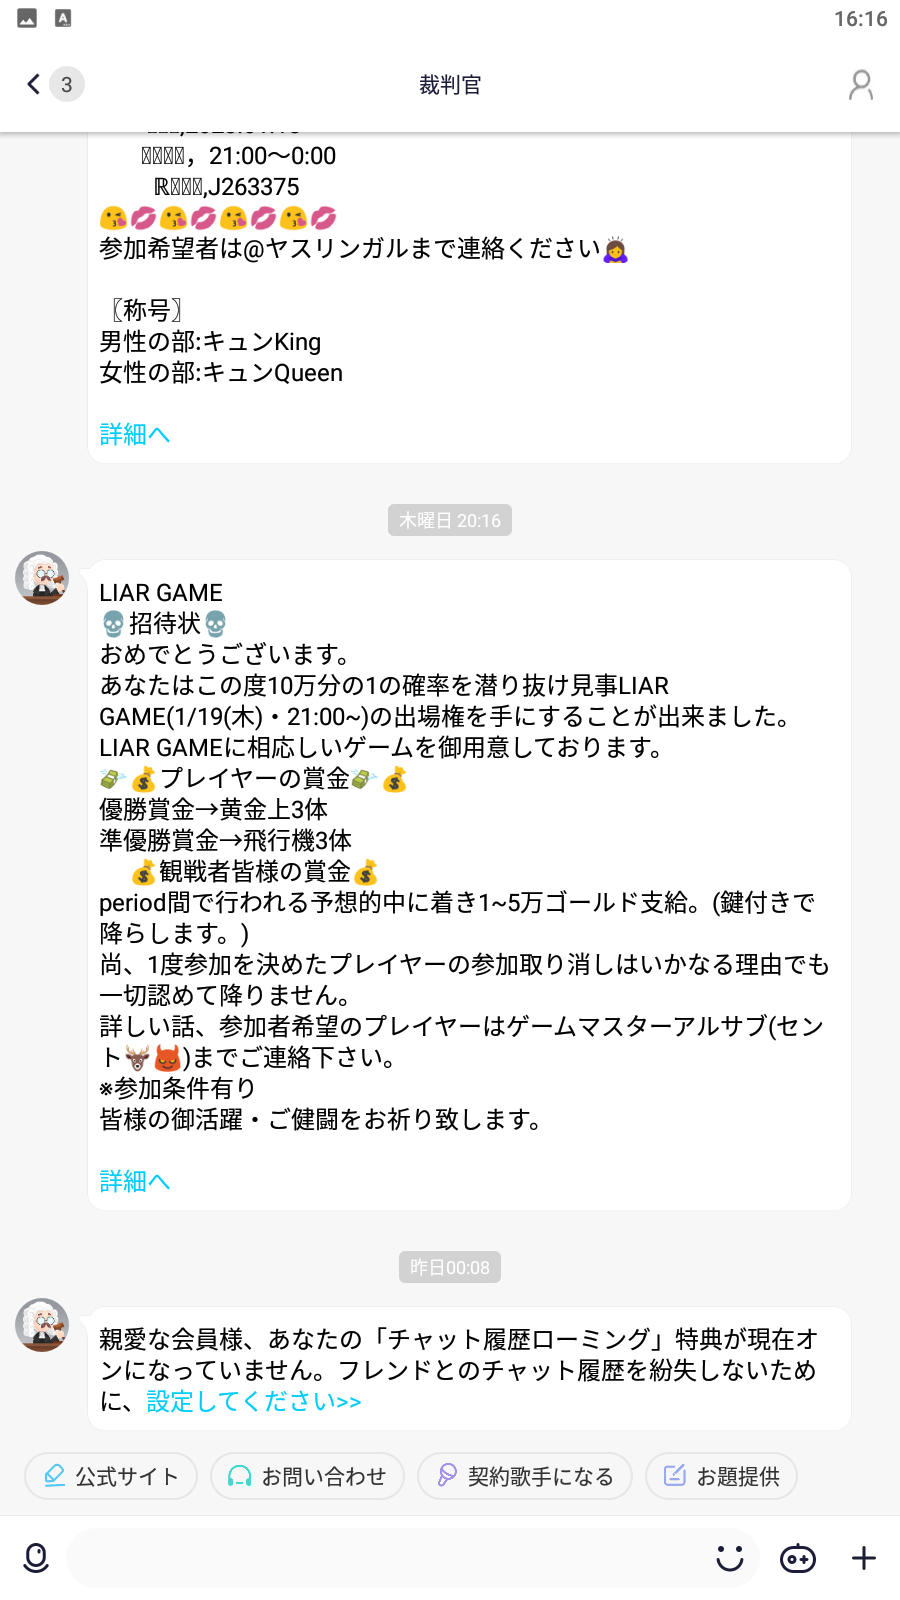 WePlay-イベント-LIAR_GAME-メッセージ.png